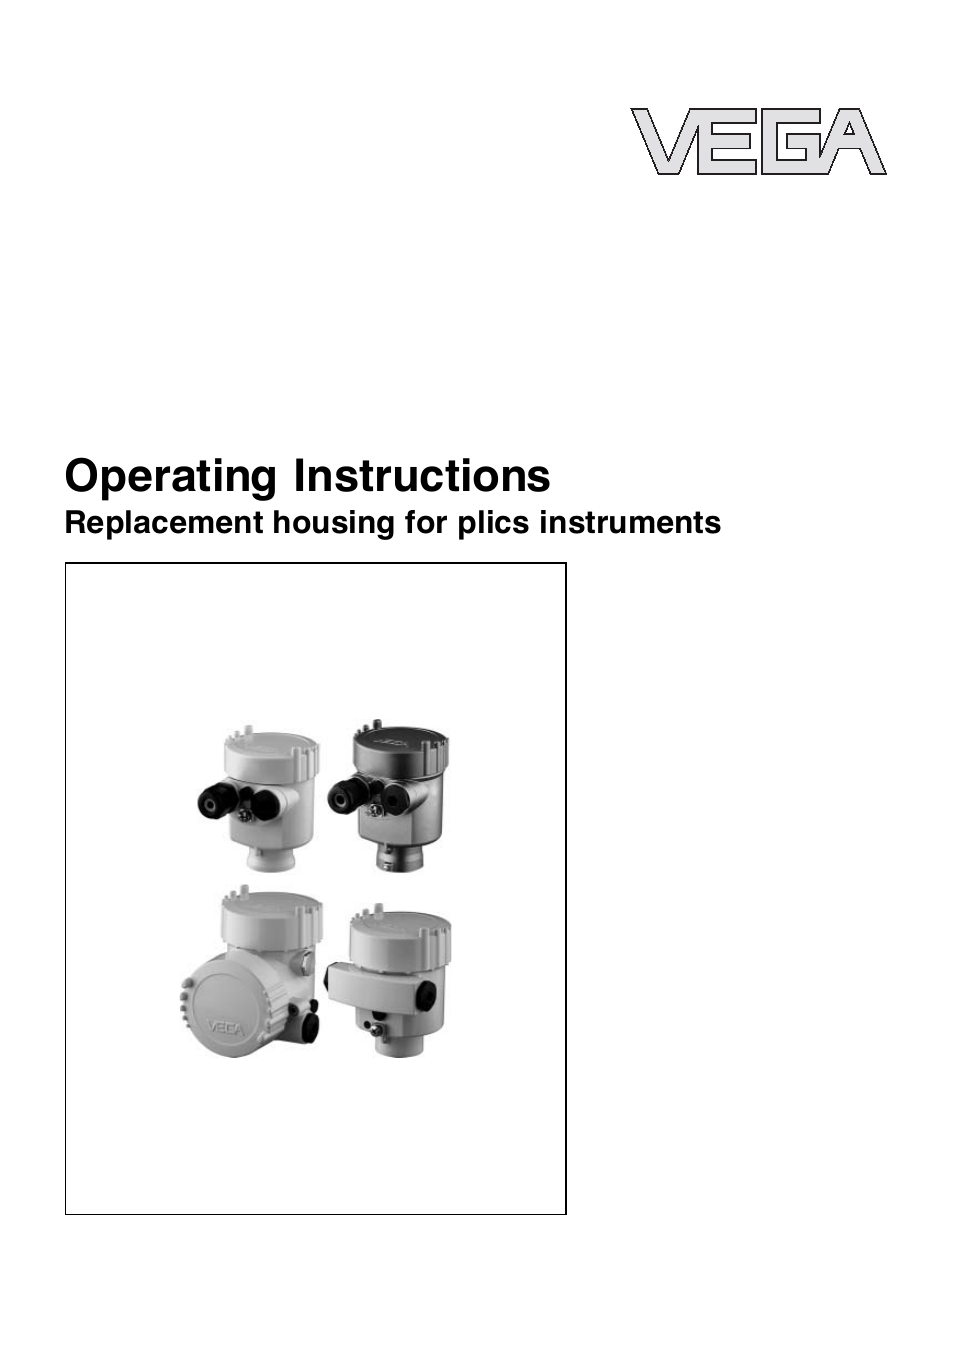 Replacement housing for plics instruments